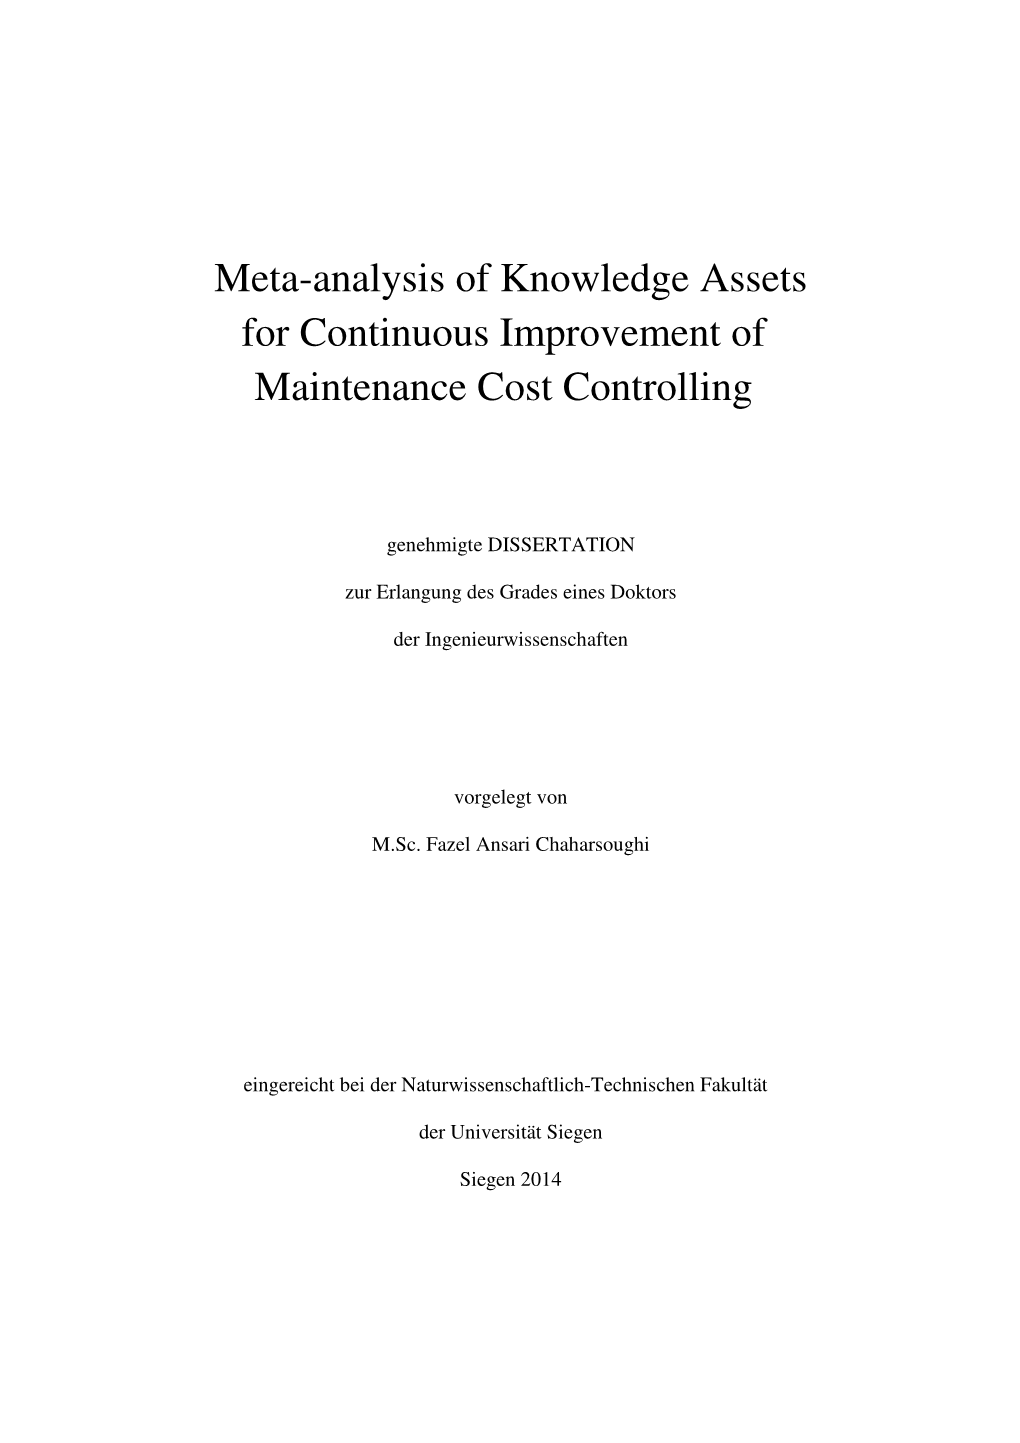 Meta-Analysis of Knowledge Assets for Continuous Improvement of Maintenance Cost Controlling